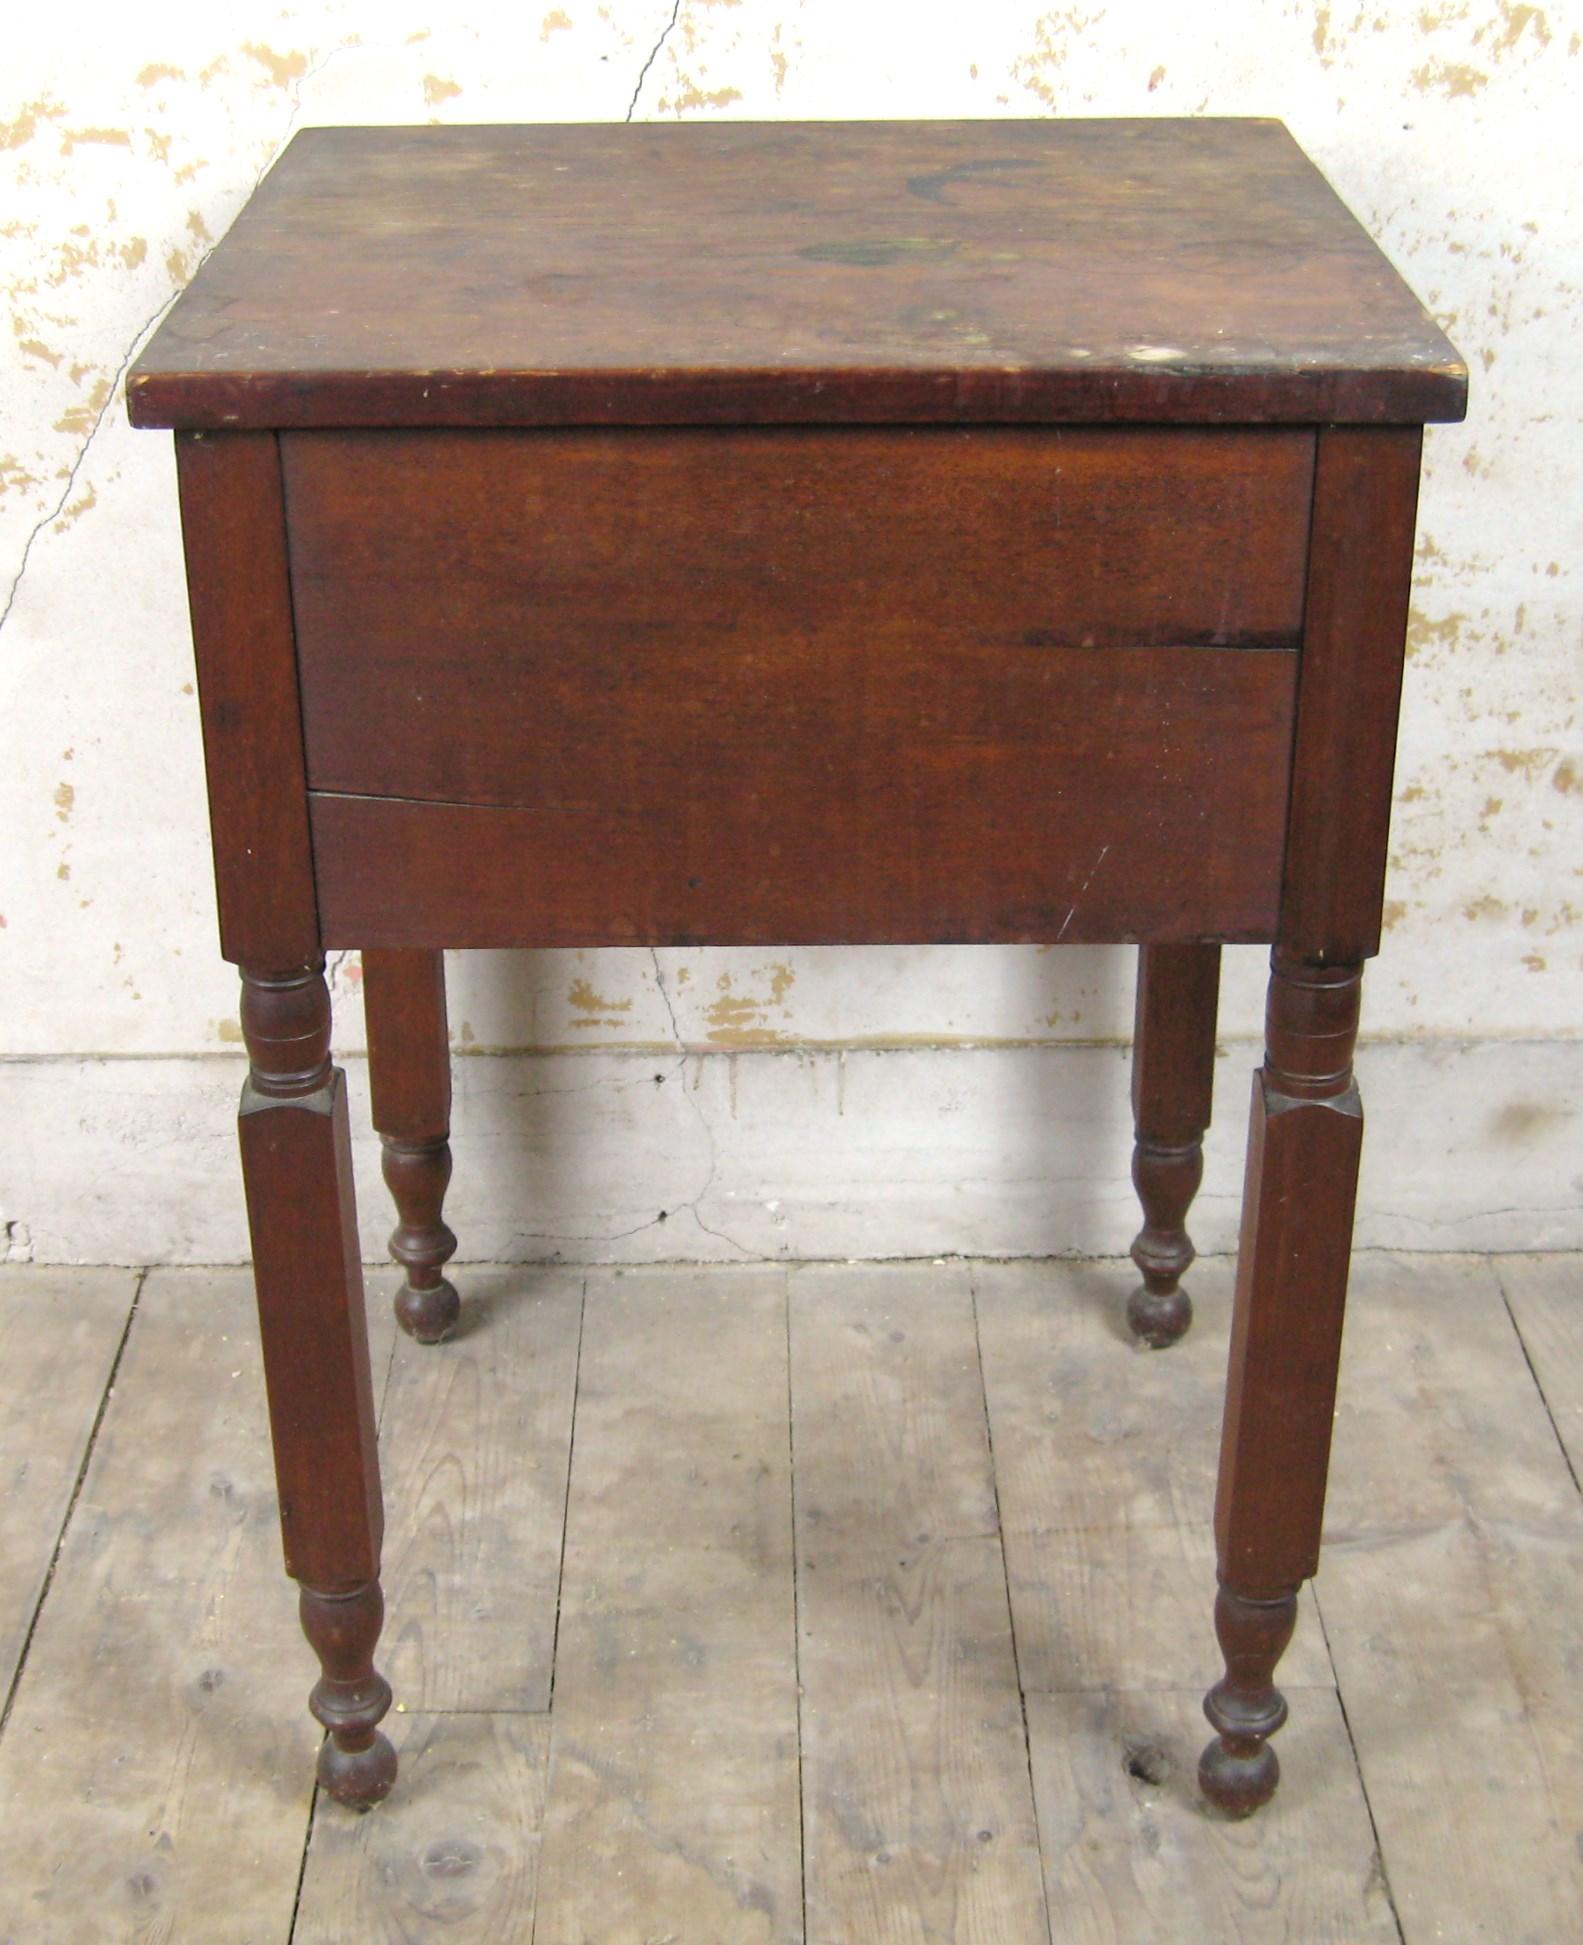 19th Century primitive Farm 2 Draw work table with New York leg In Good Condition For Sale In Wallkill, NY